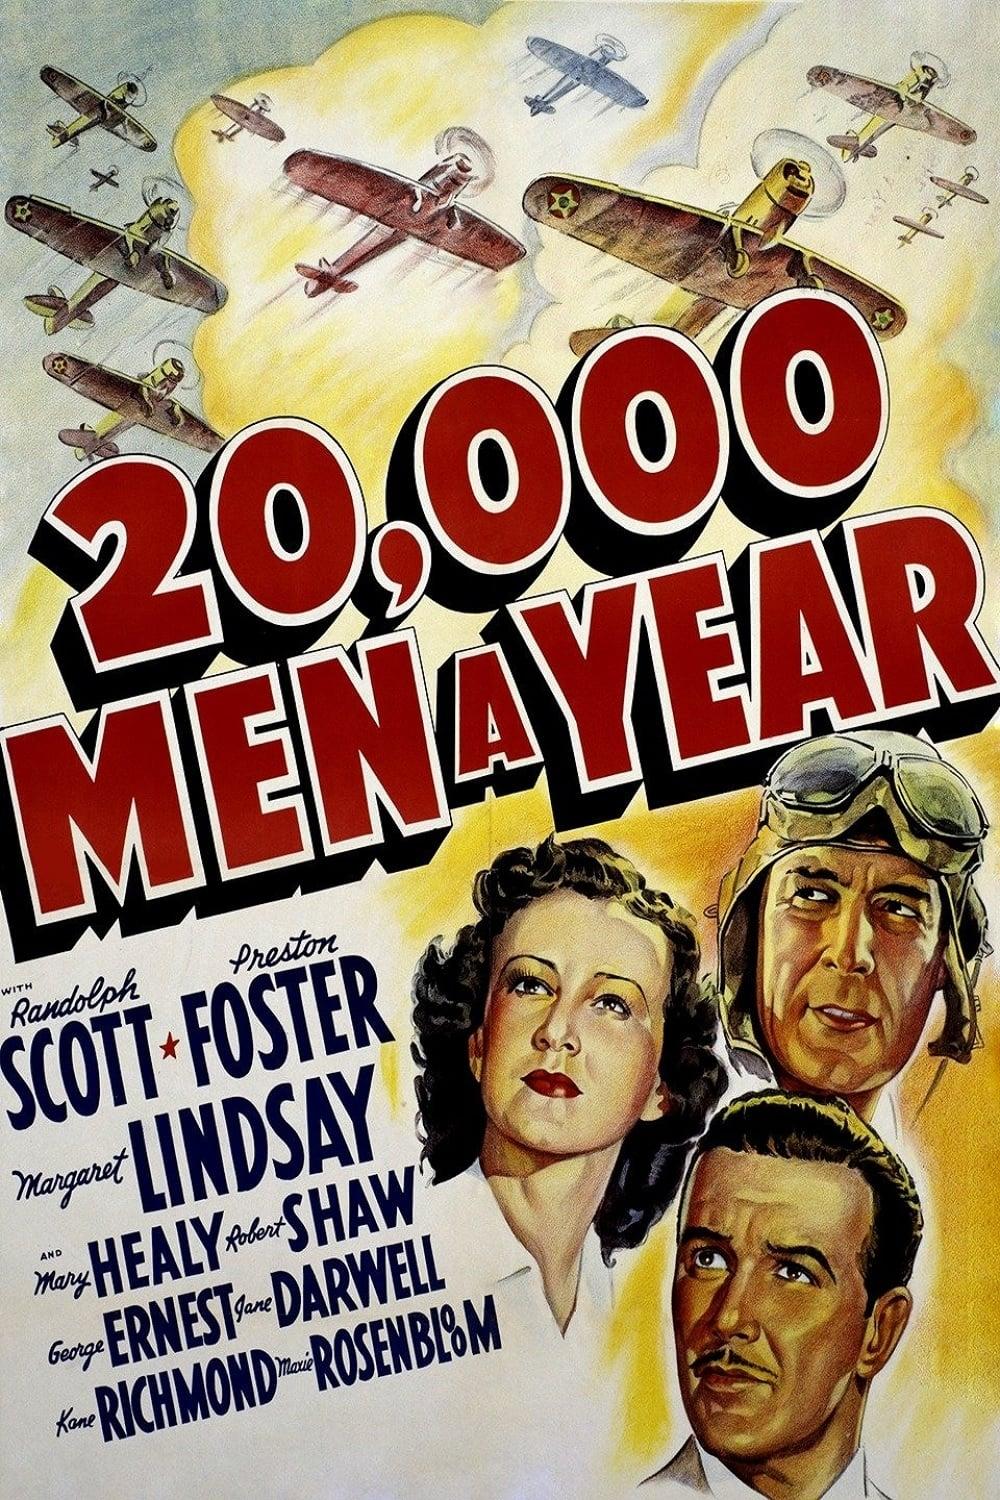 20,000 Men a Year poster